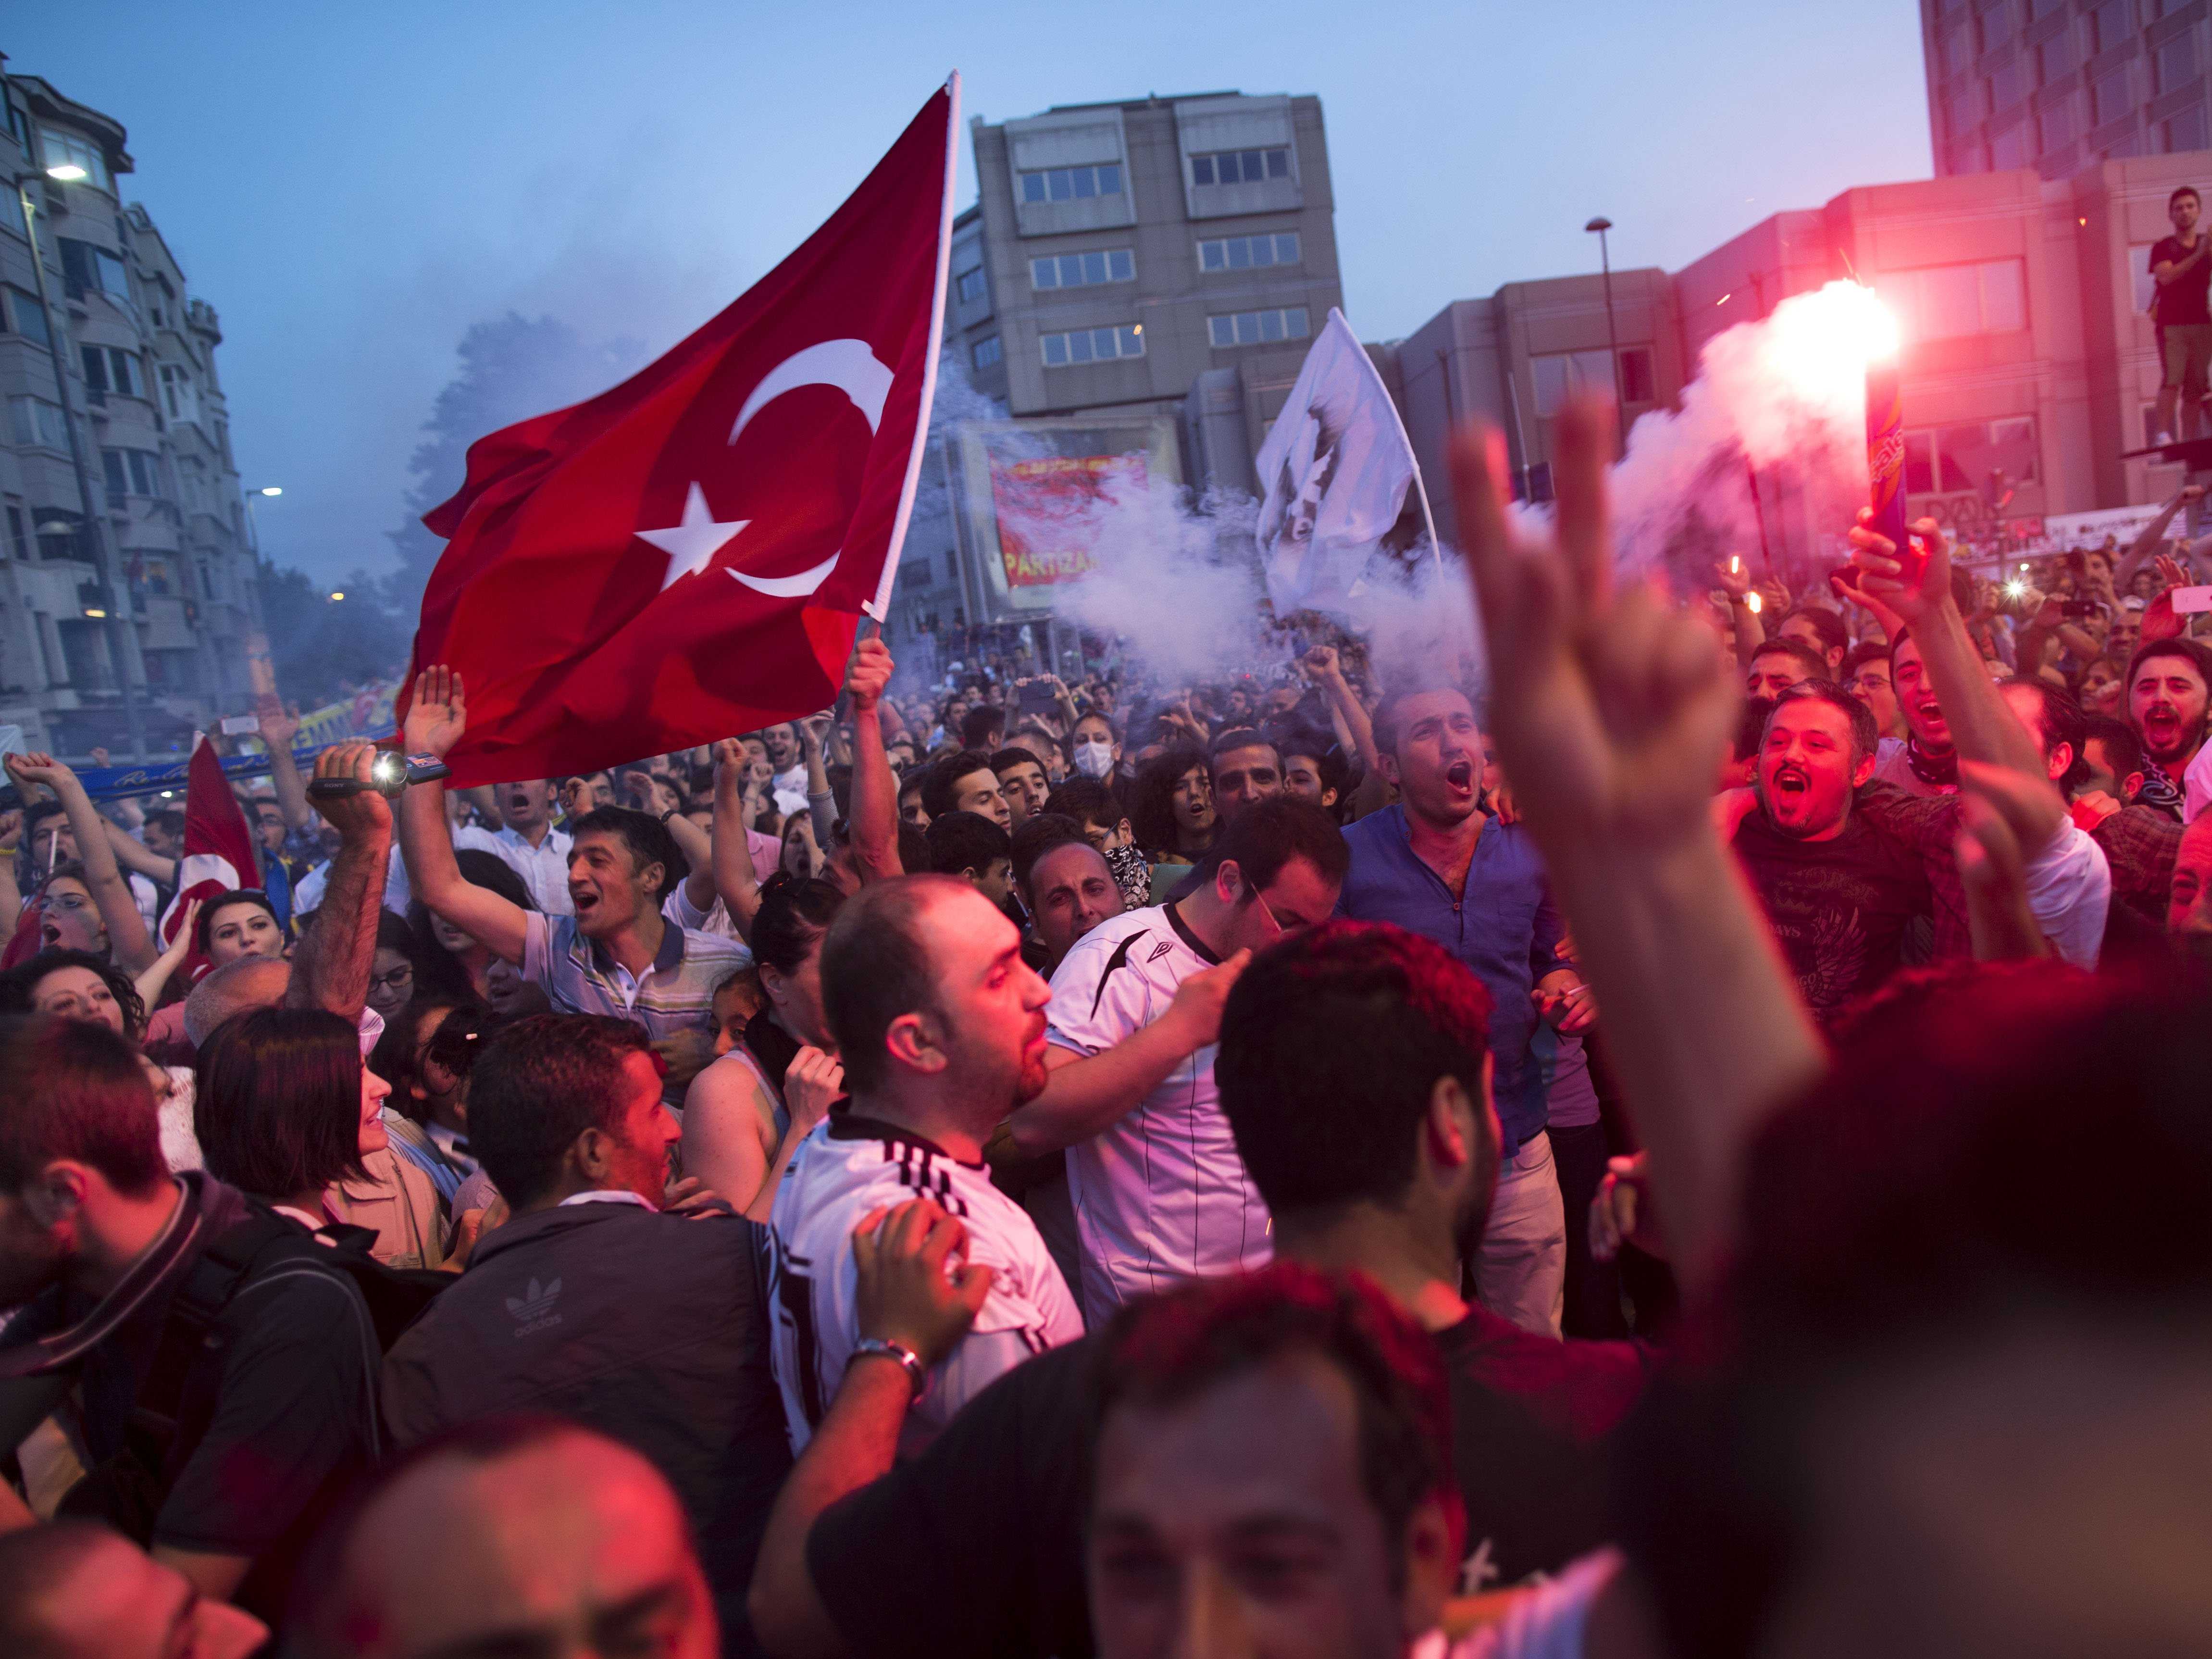 in-a-stunning-escalation-turkey-warns-it-may-deploy-army-against-protesters